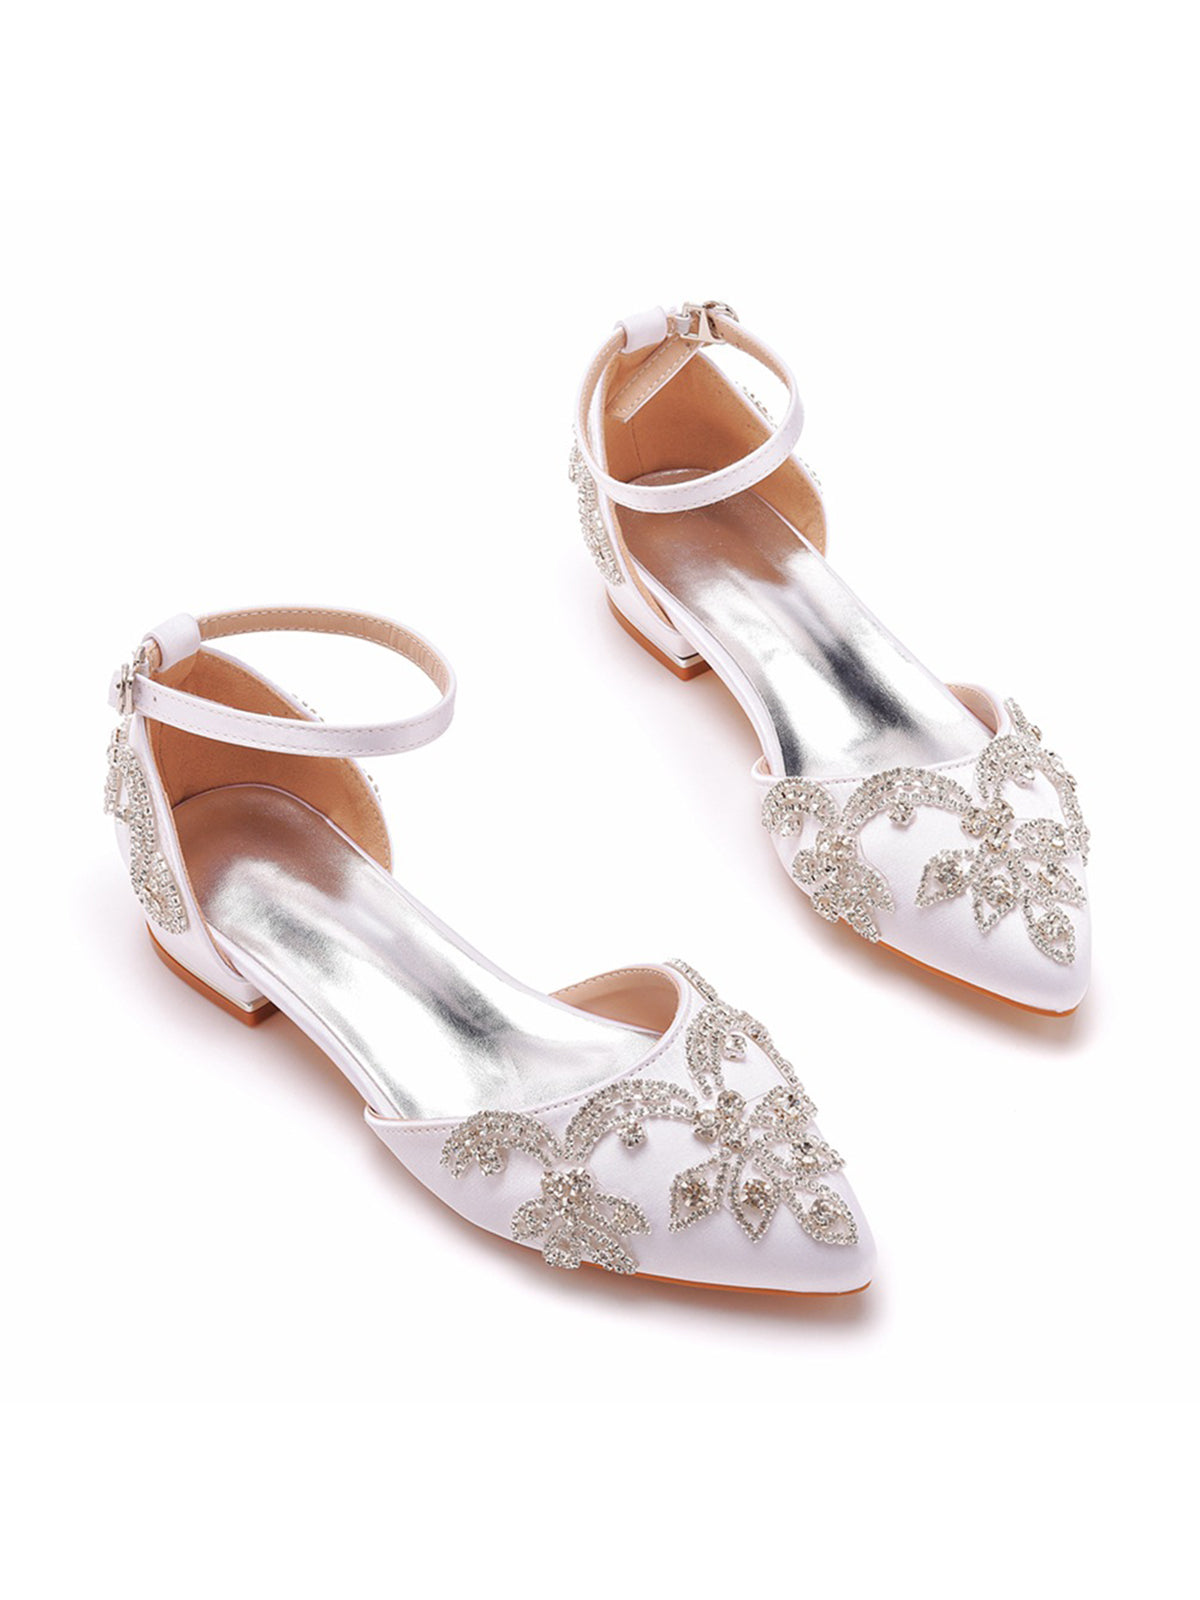 White Satin Rhinestone Flowers Pointed Toe Ankle Strap Chunky Heels